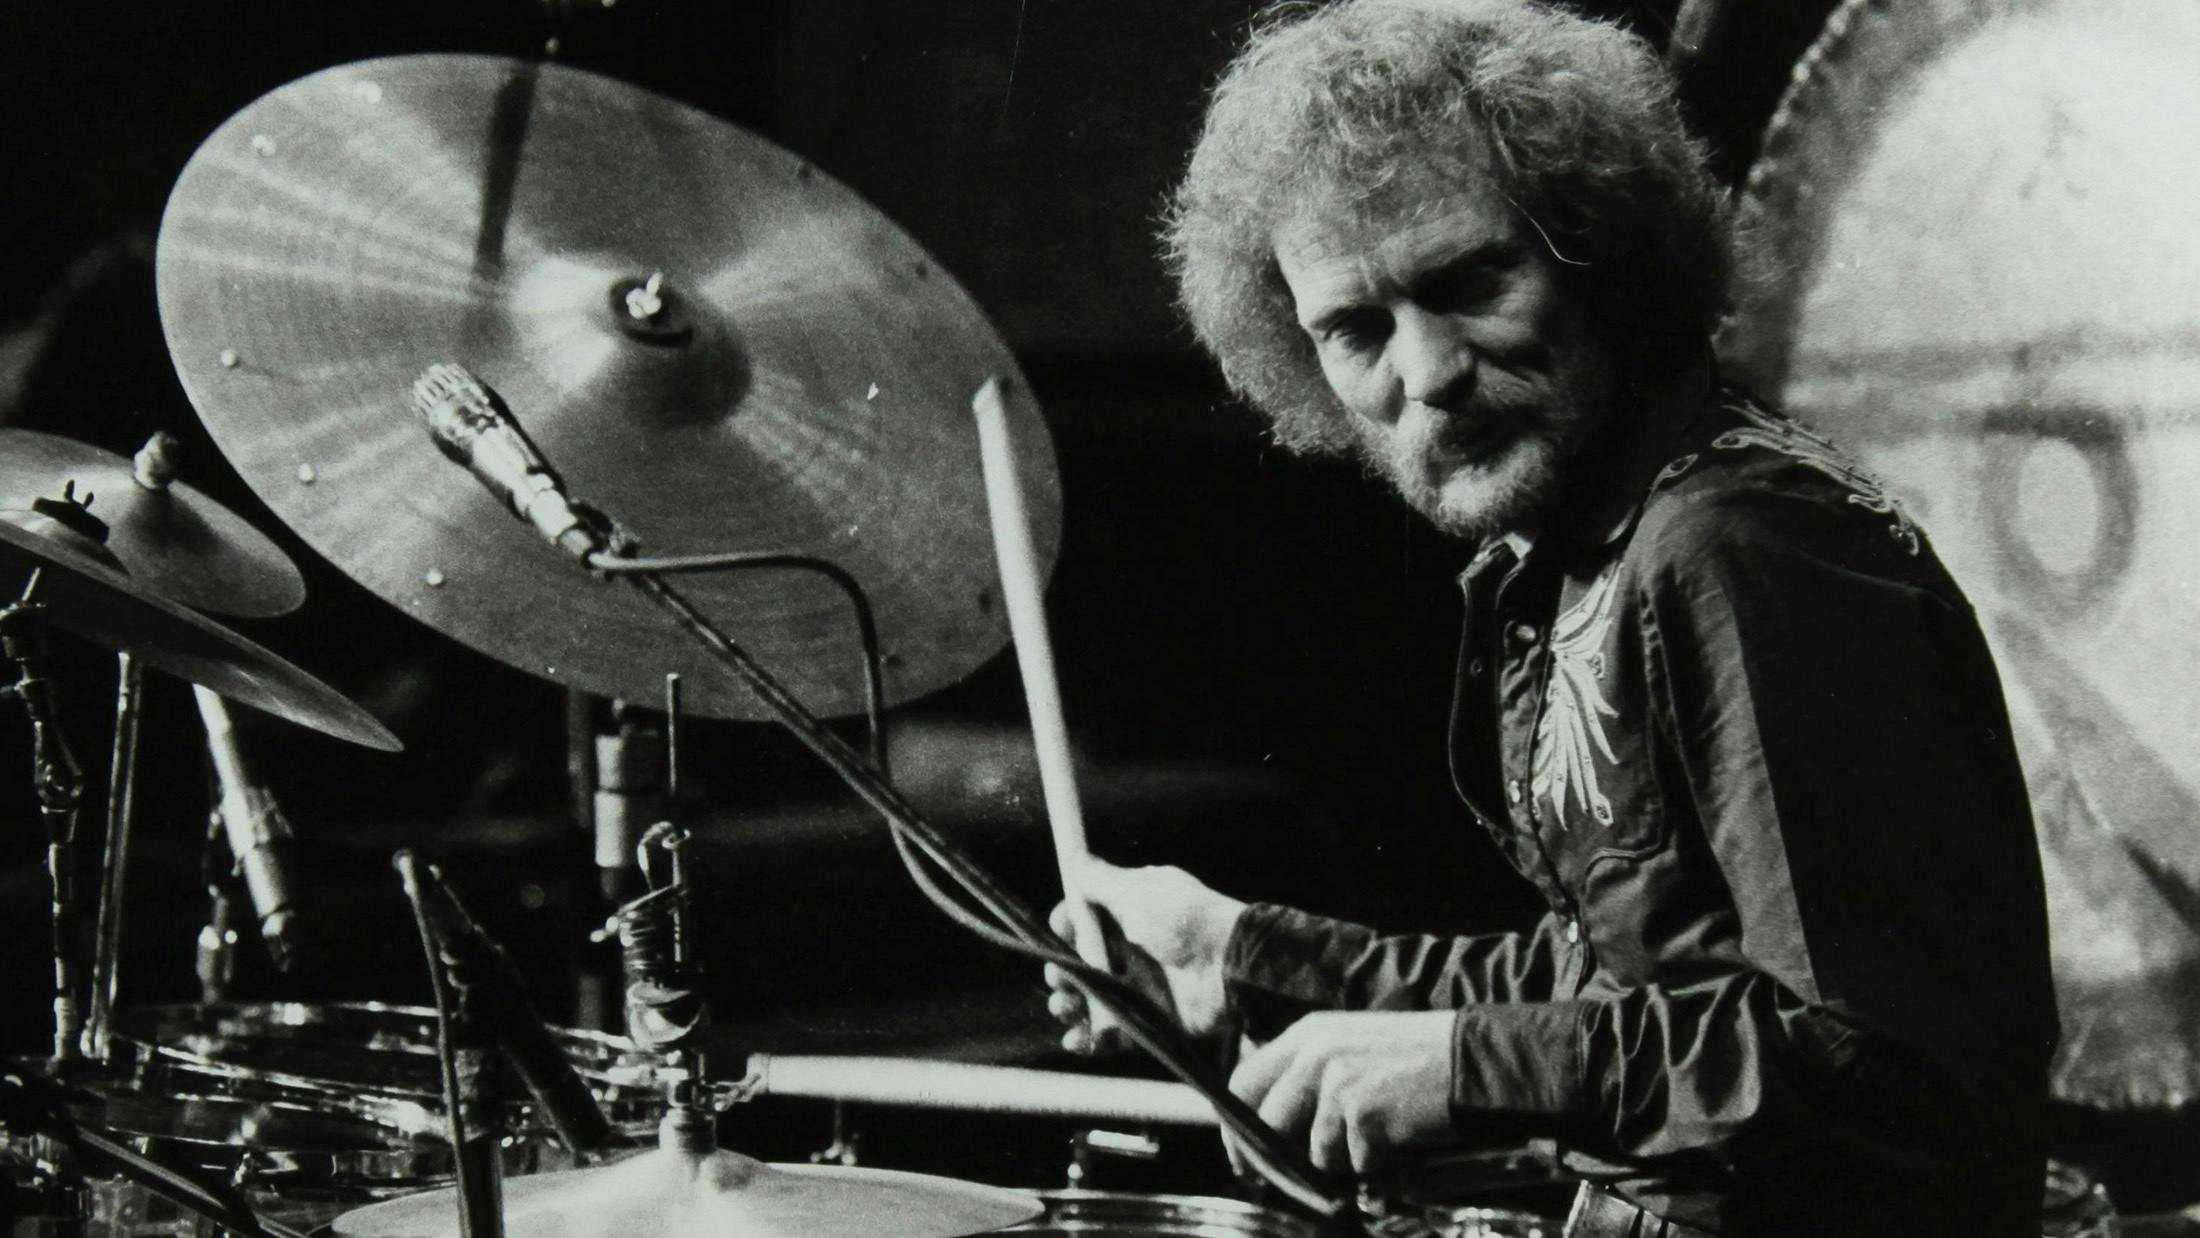 A Tribute To Ginger Baker: The Founding Father Of Heavy Music